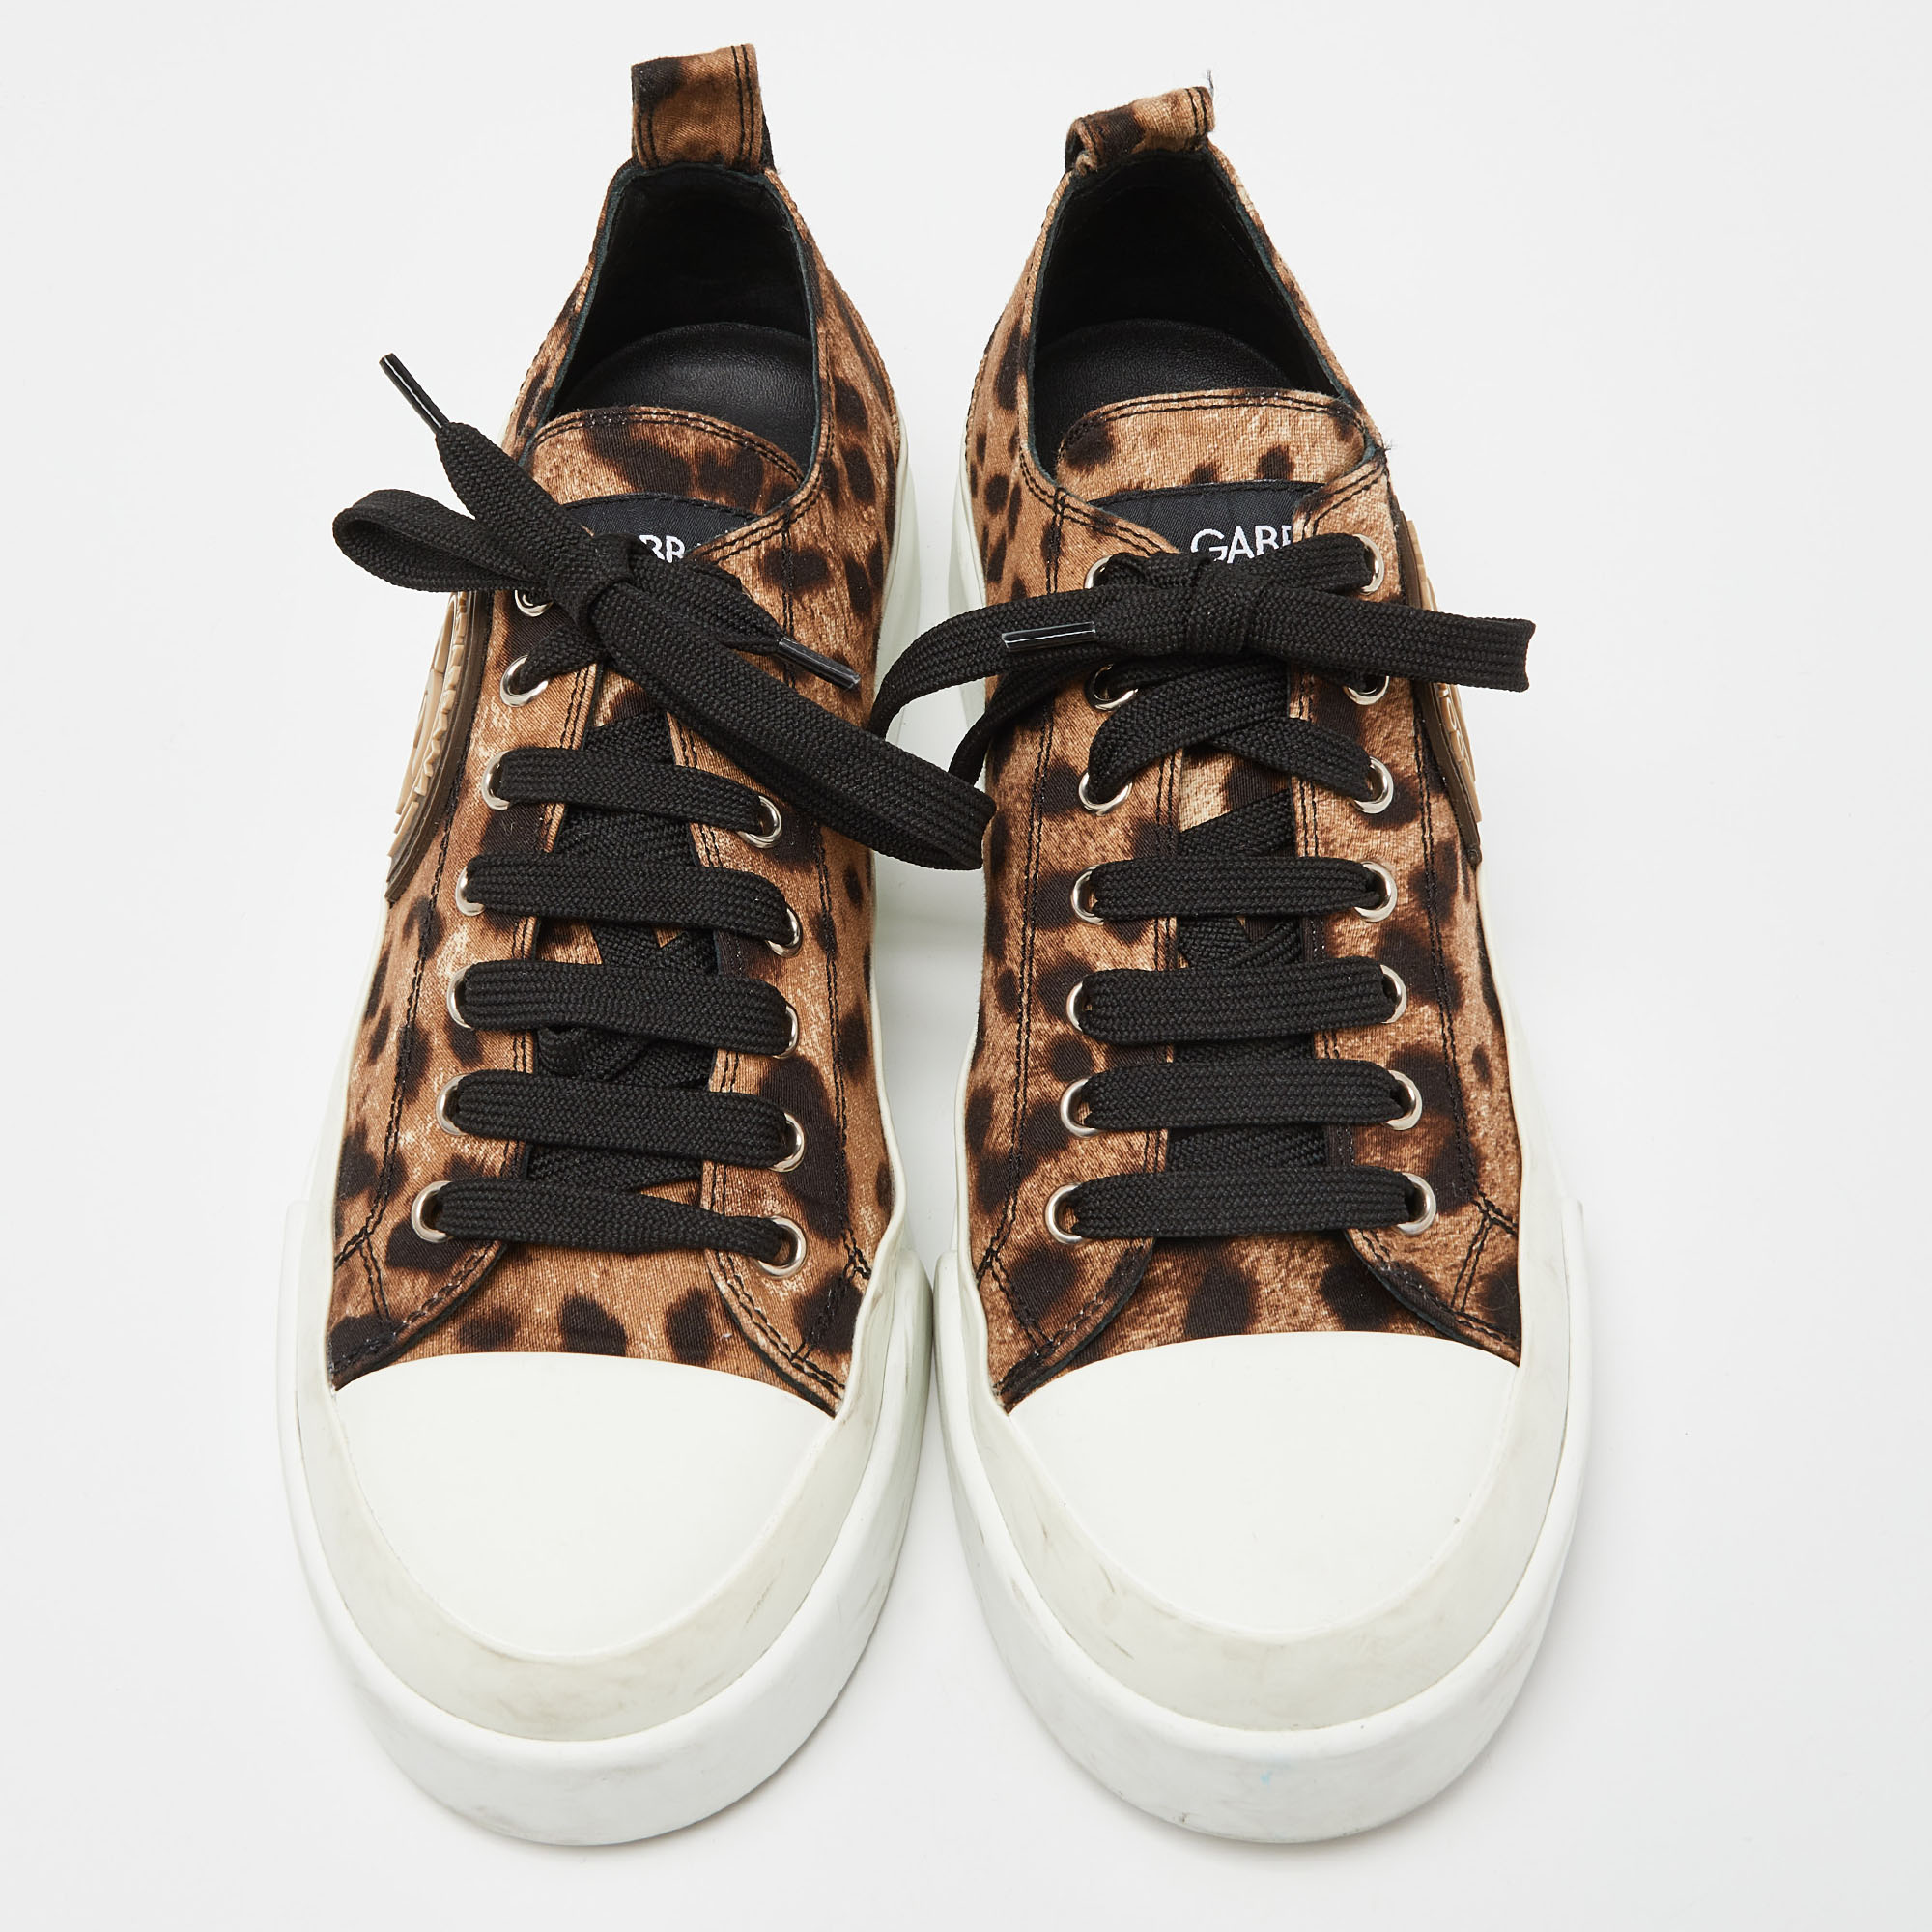 Dolce & Gabbana Brown Leopard Print Canvas Lace Low Top Sneakers Size 39